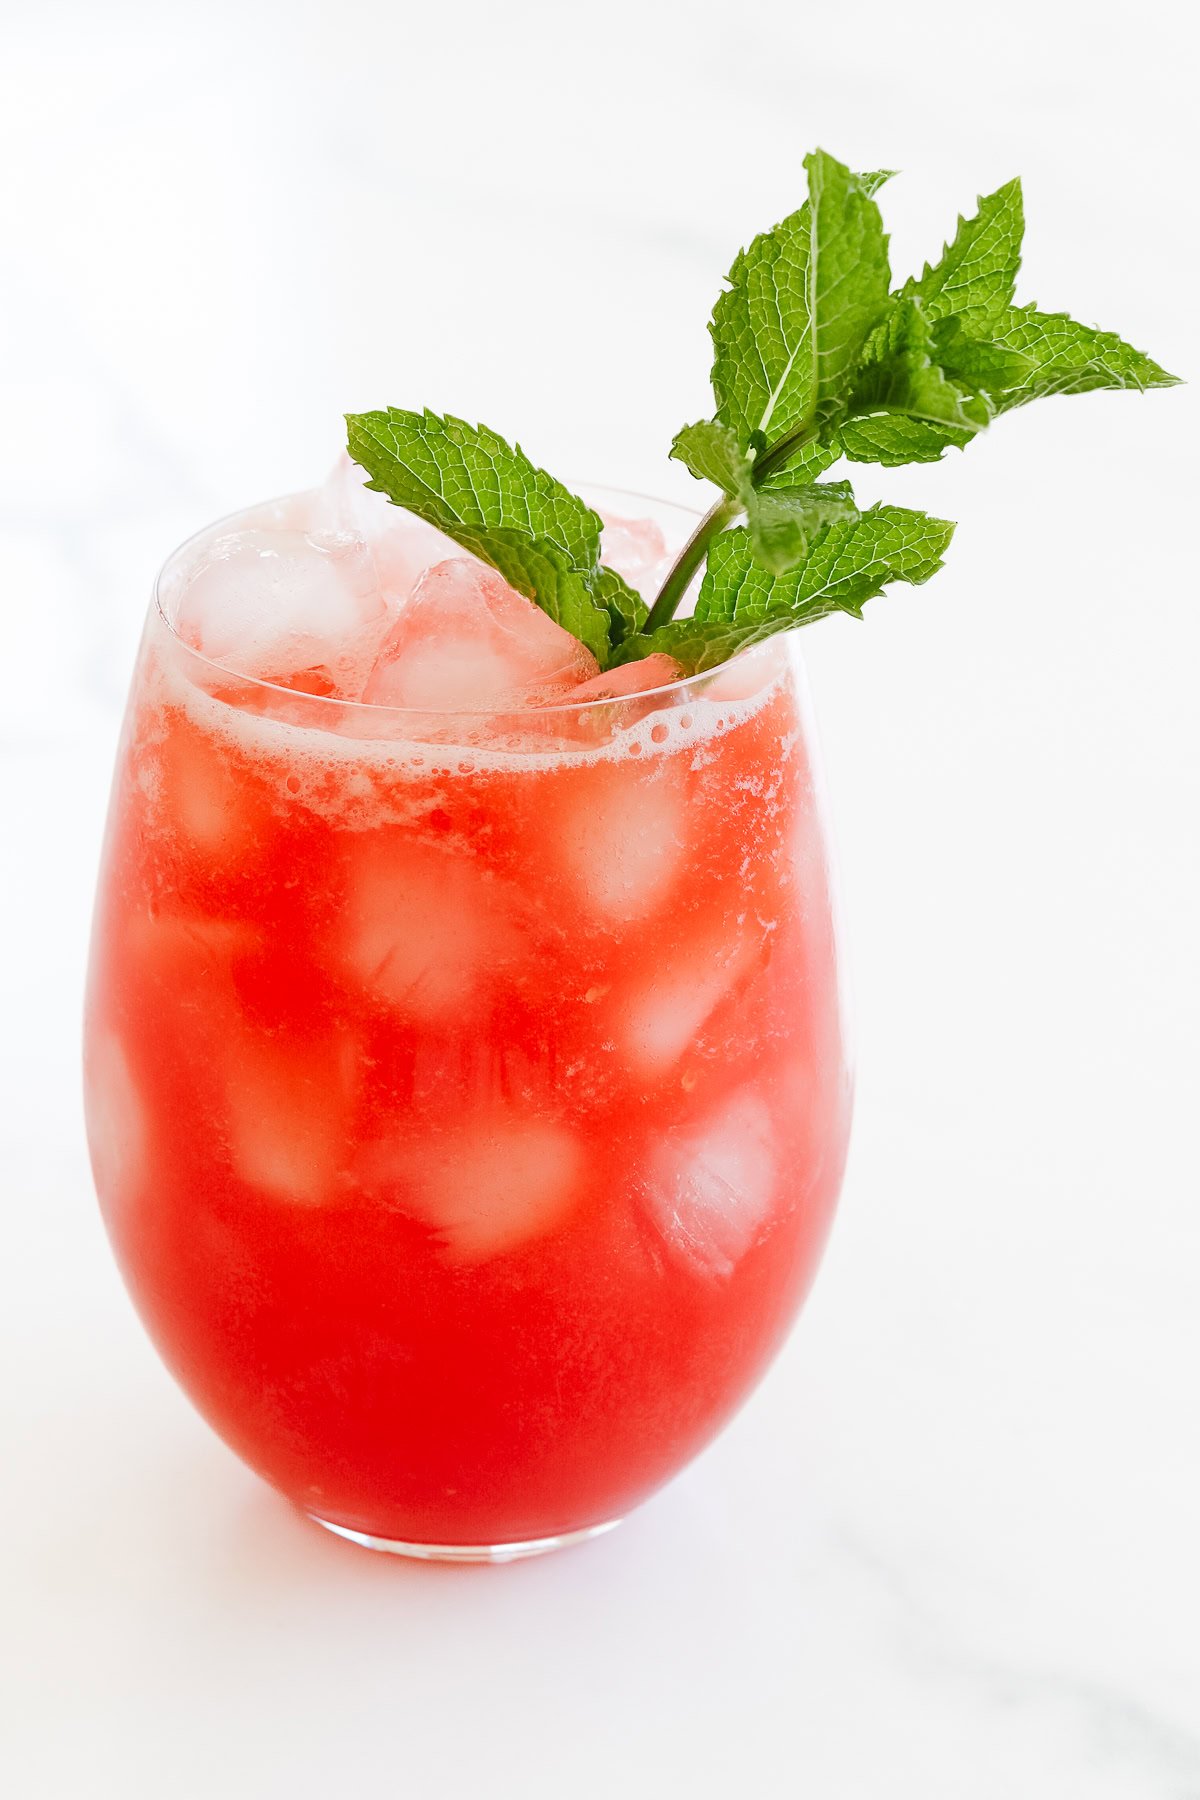 A cold, red watermelon juice with ice cubes, garnished with a sprig of fresh mint in a clear glass on a white surface.